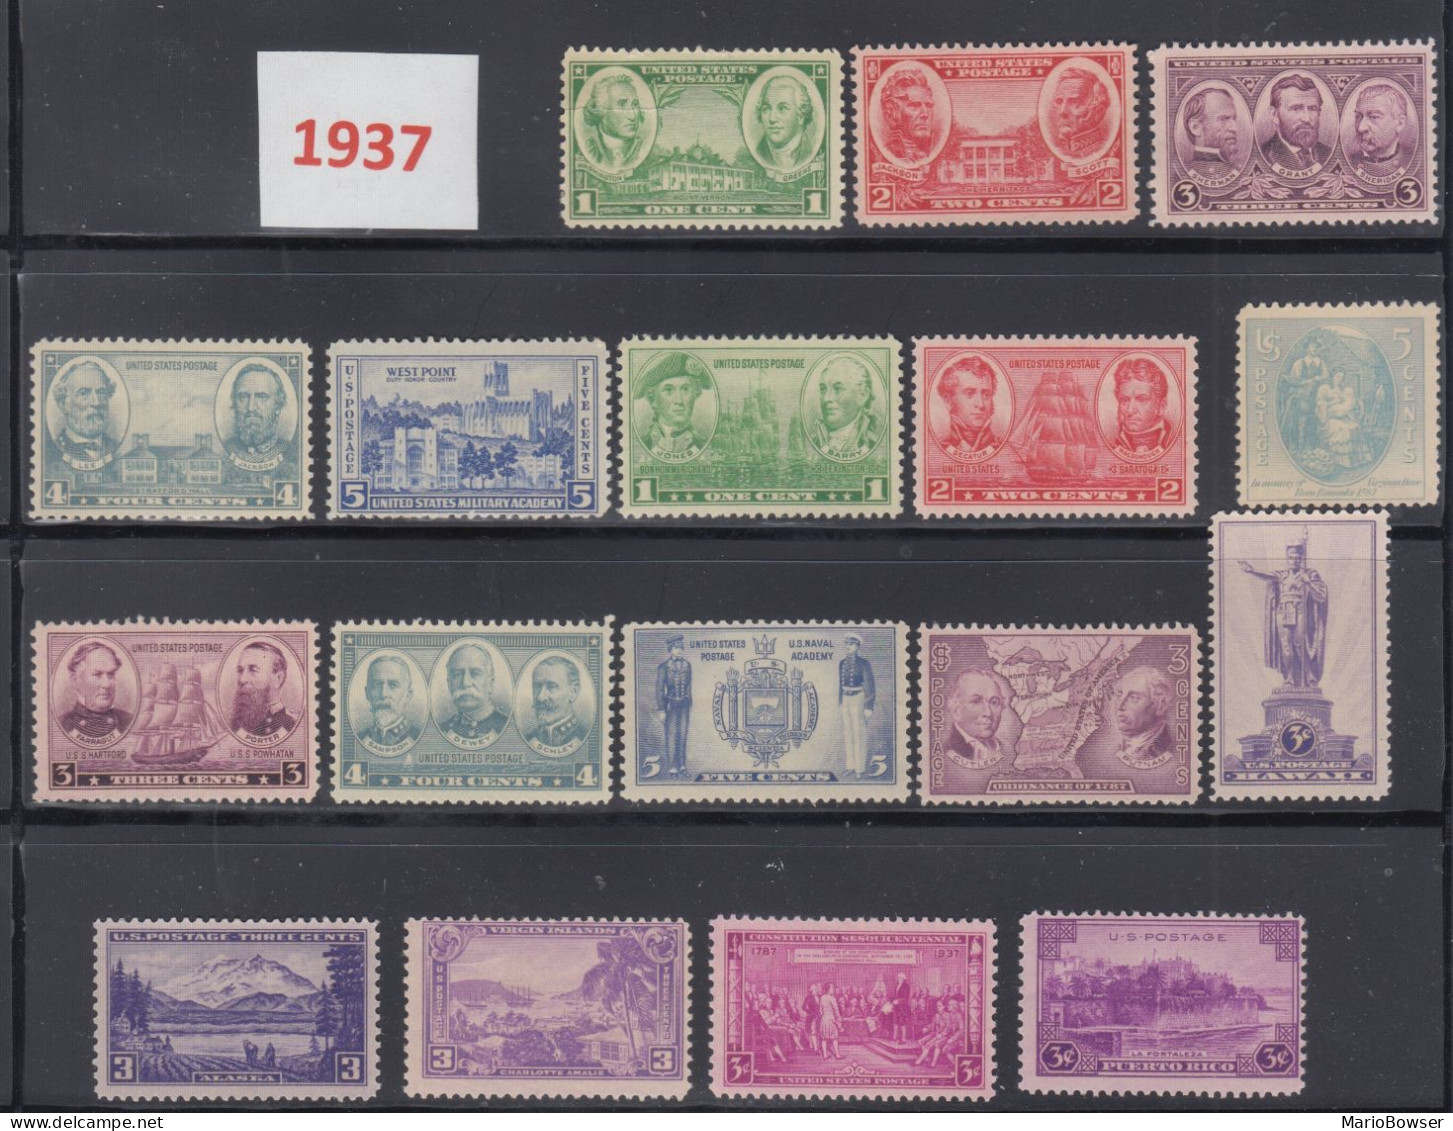 USA 1937 Full Year Commemorative MNH Stamps Set SC# 785-902 With 17 Stamps - Volledige Jaargang